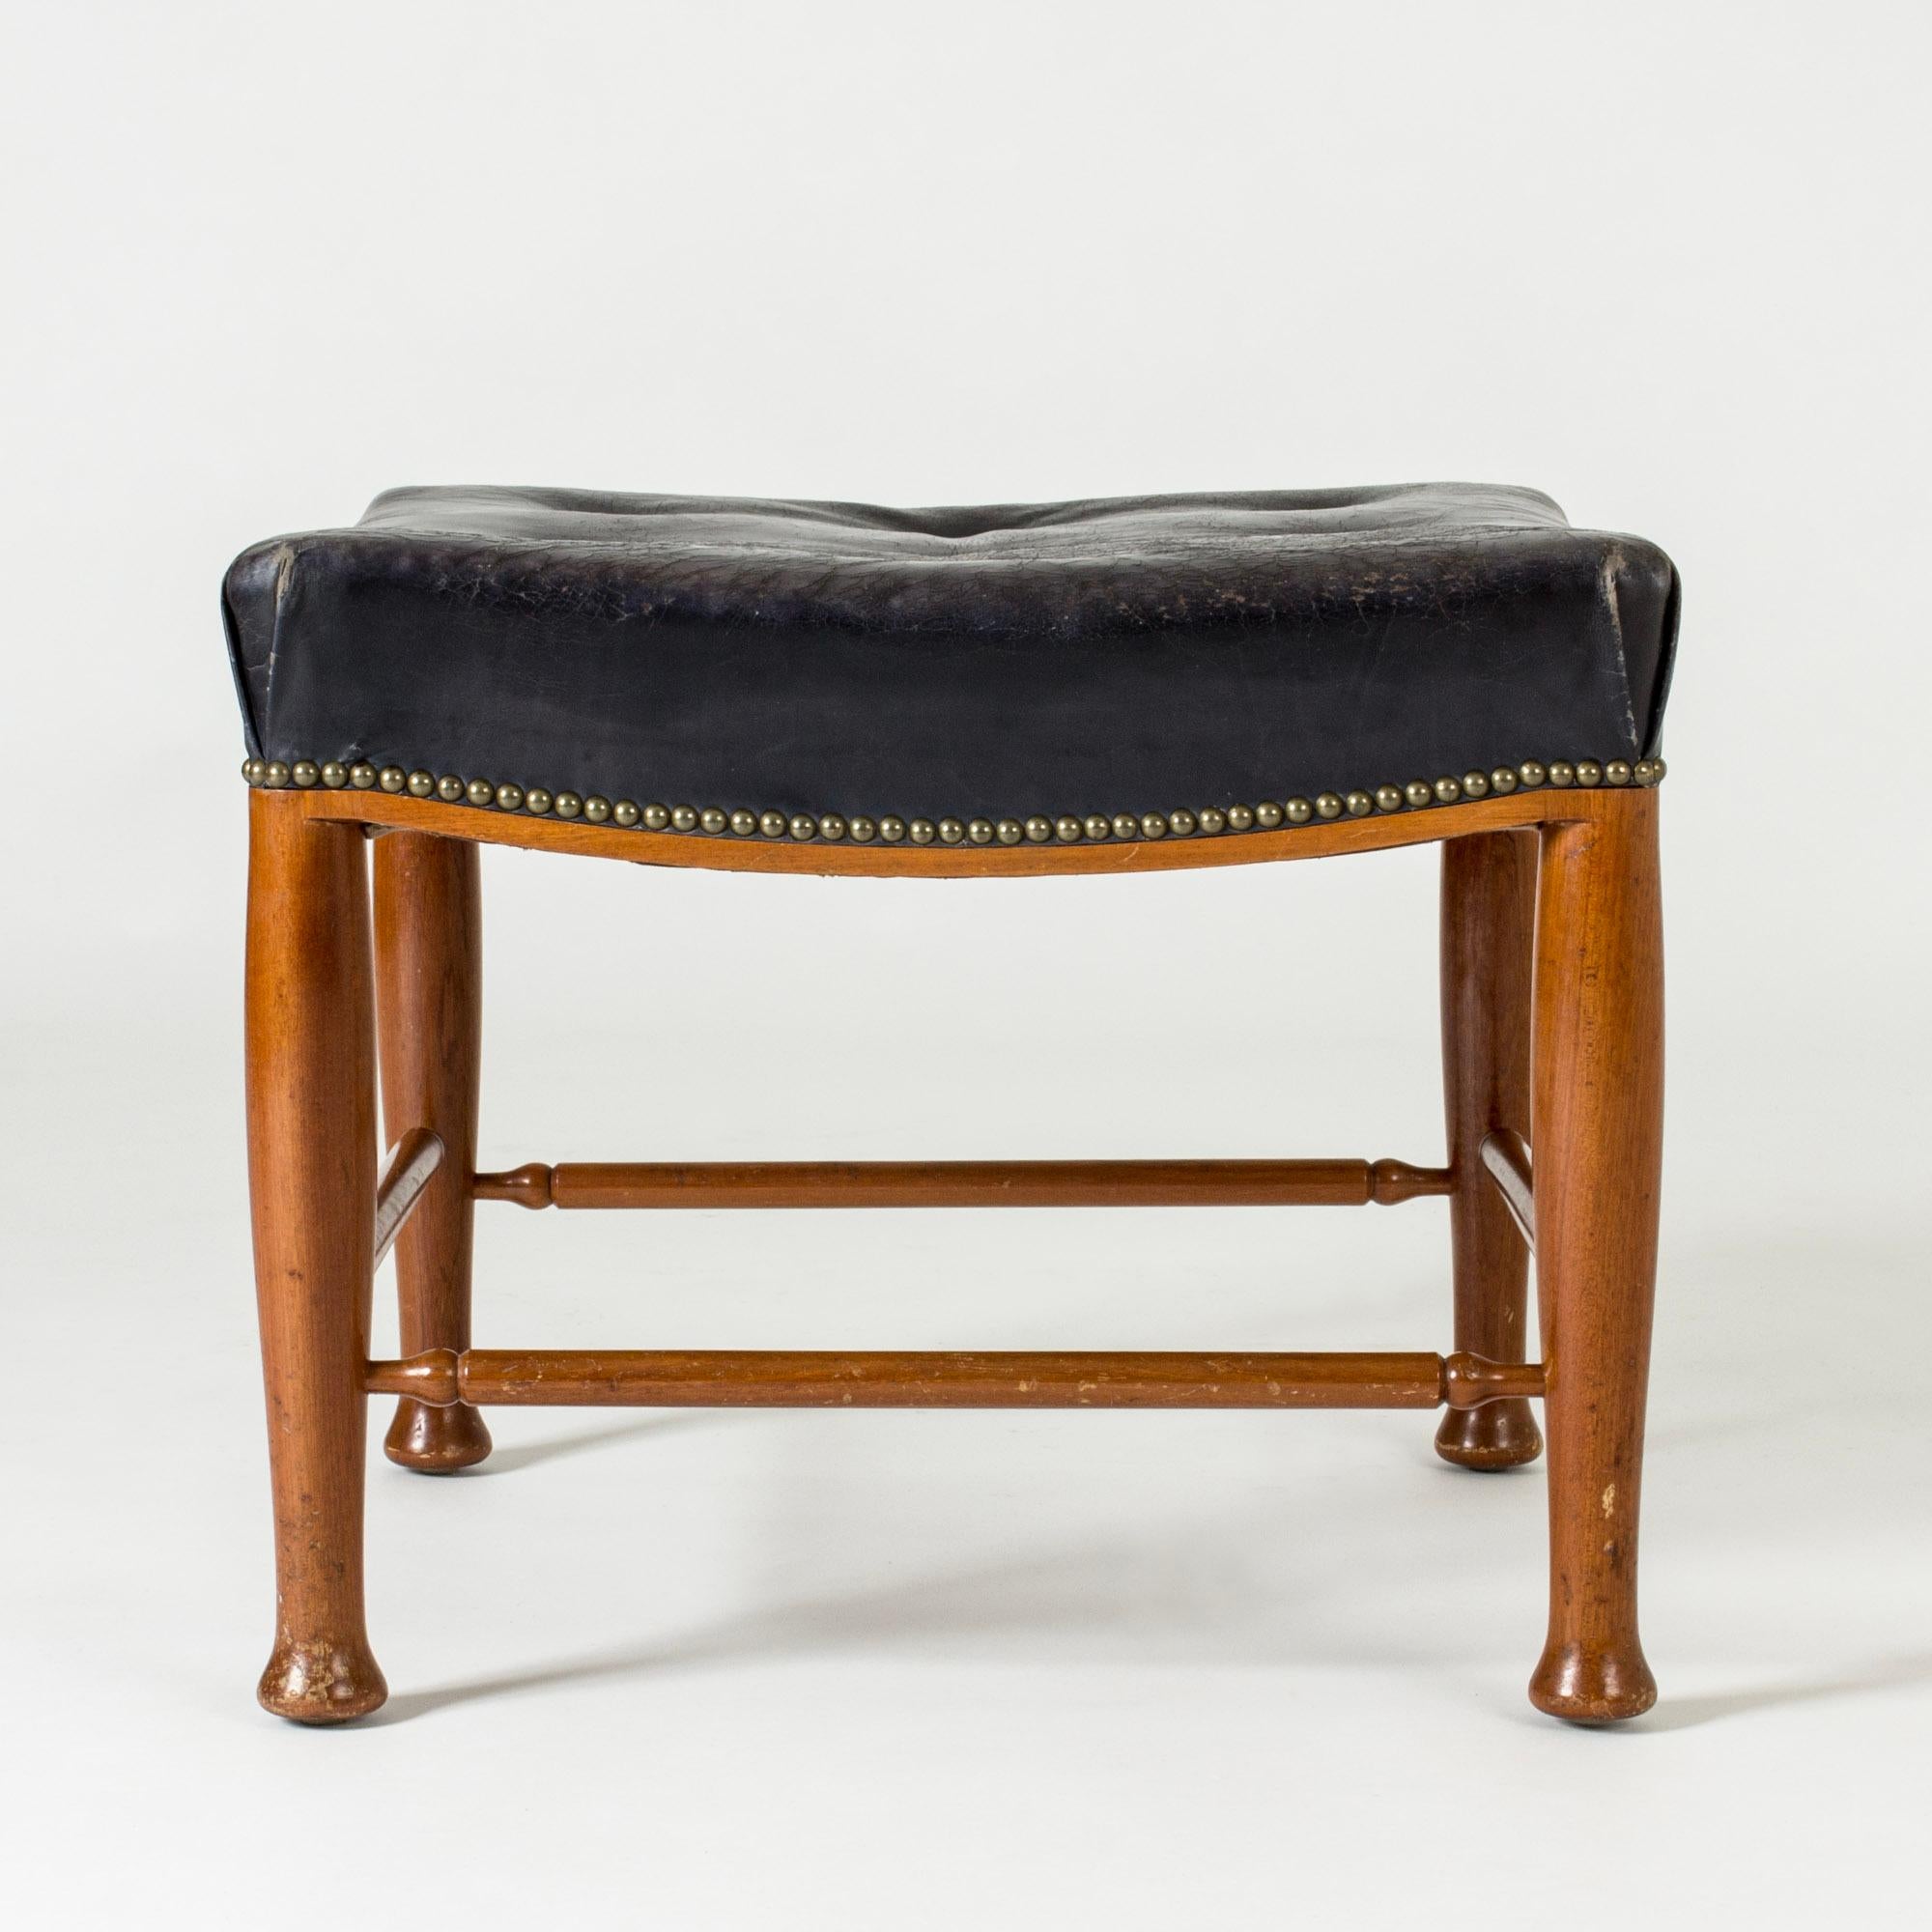 Ottoman by Josef Frank, made from mahogany with elegantly sculpted legs. Original black leather upholstery, decorative brass nails around the edge of the seat.